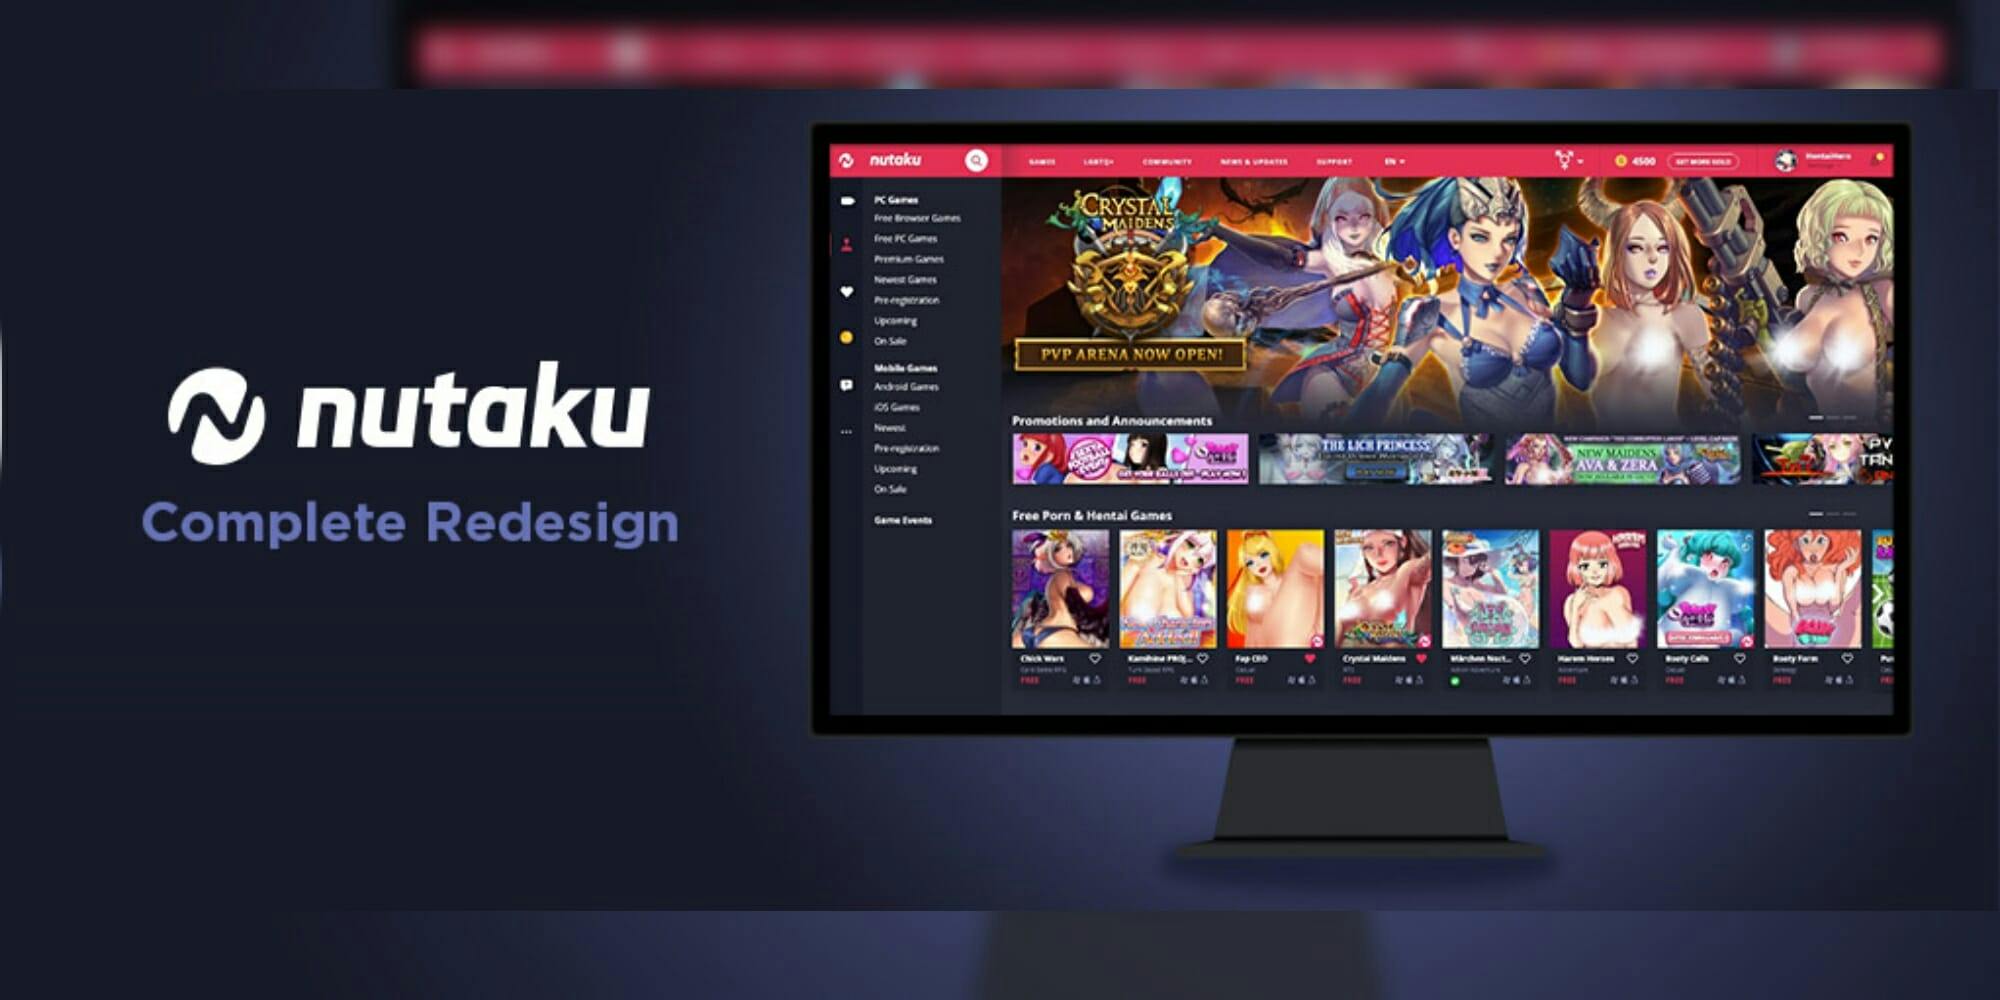 Nutaku announces redesign and filters for LGBTQ porn games (updated)